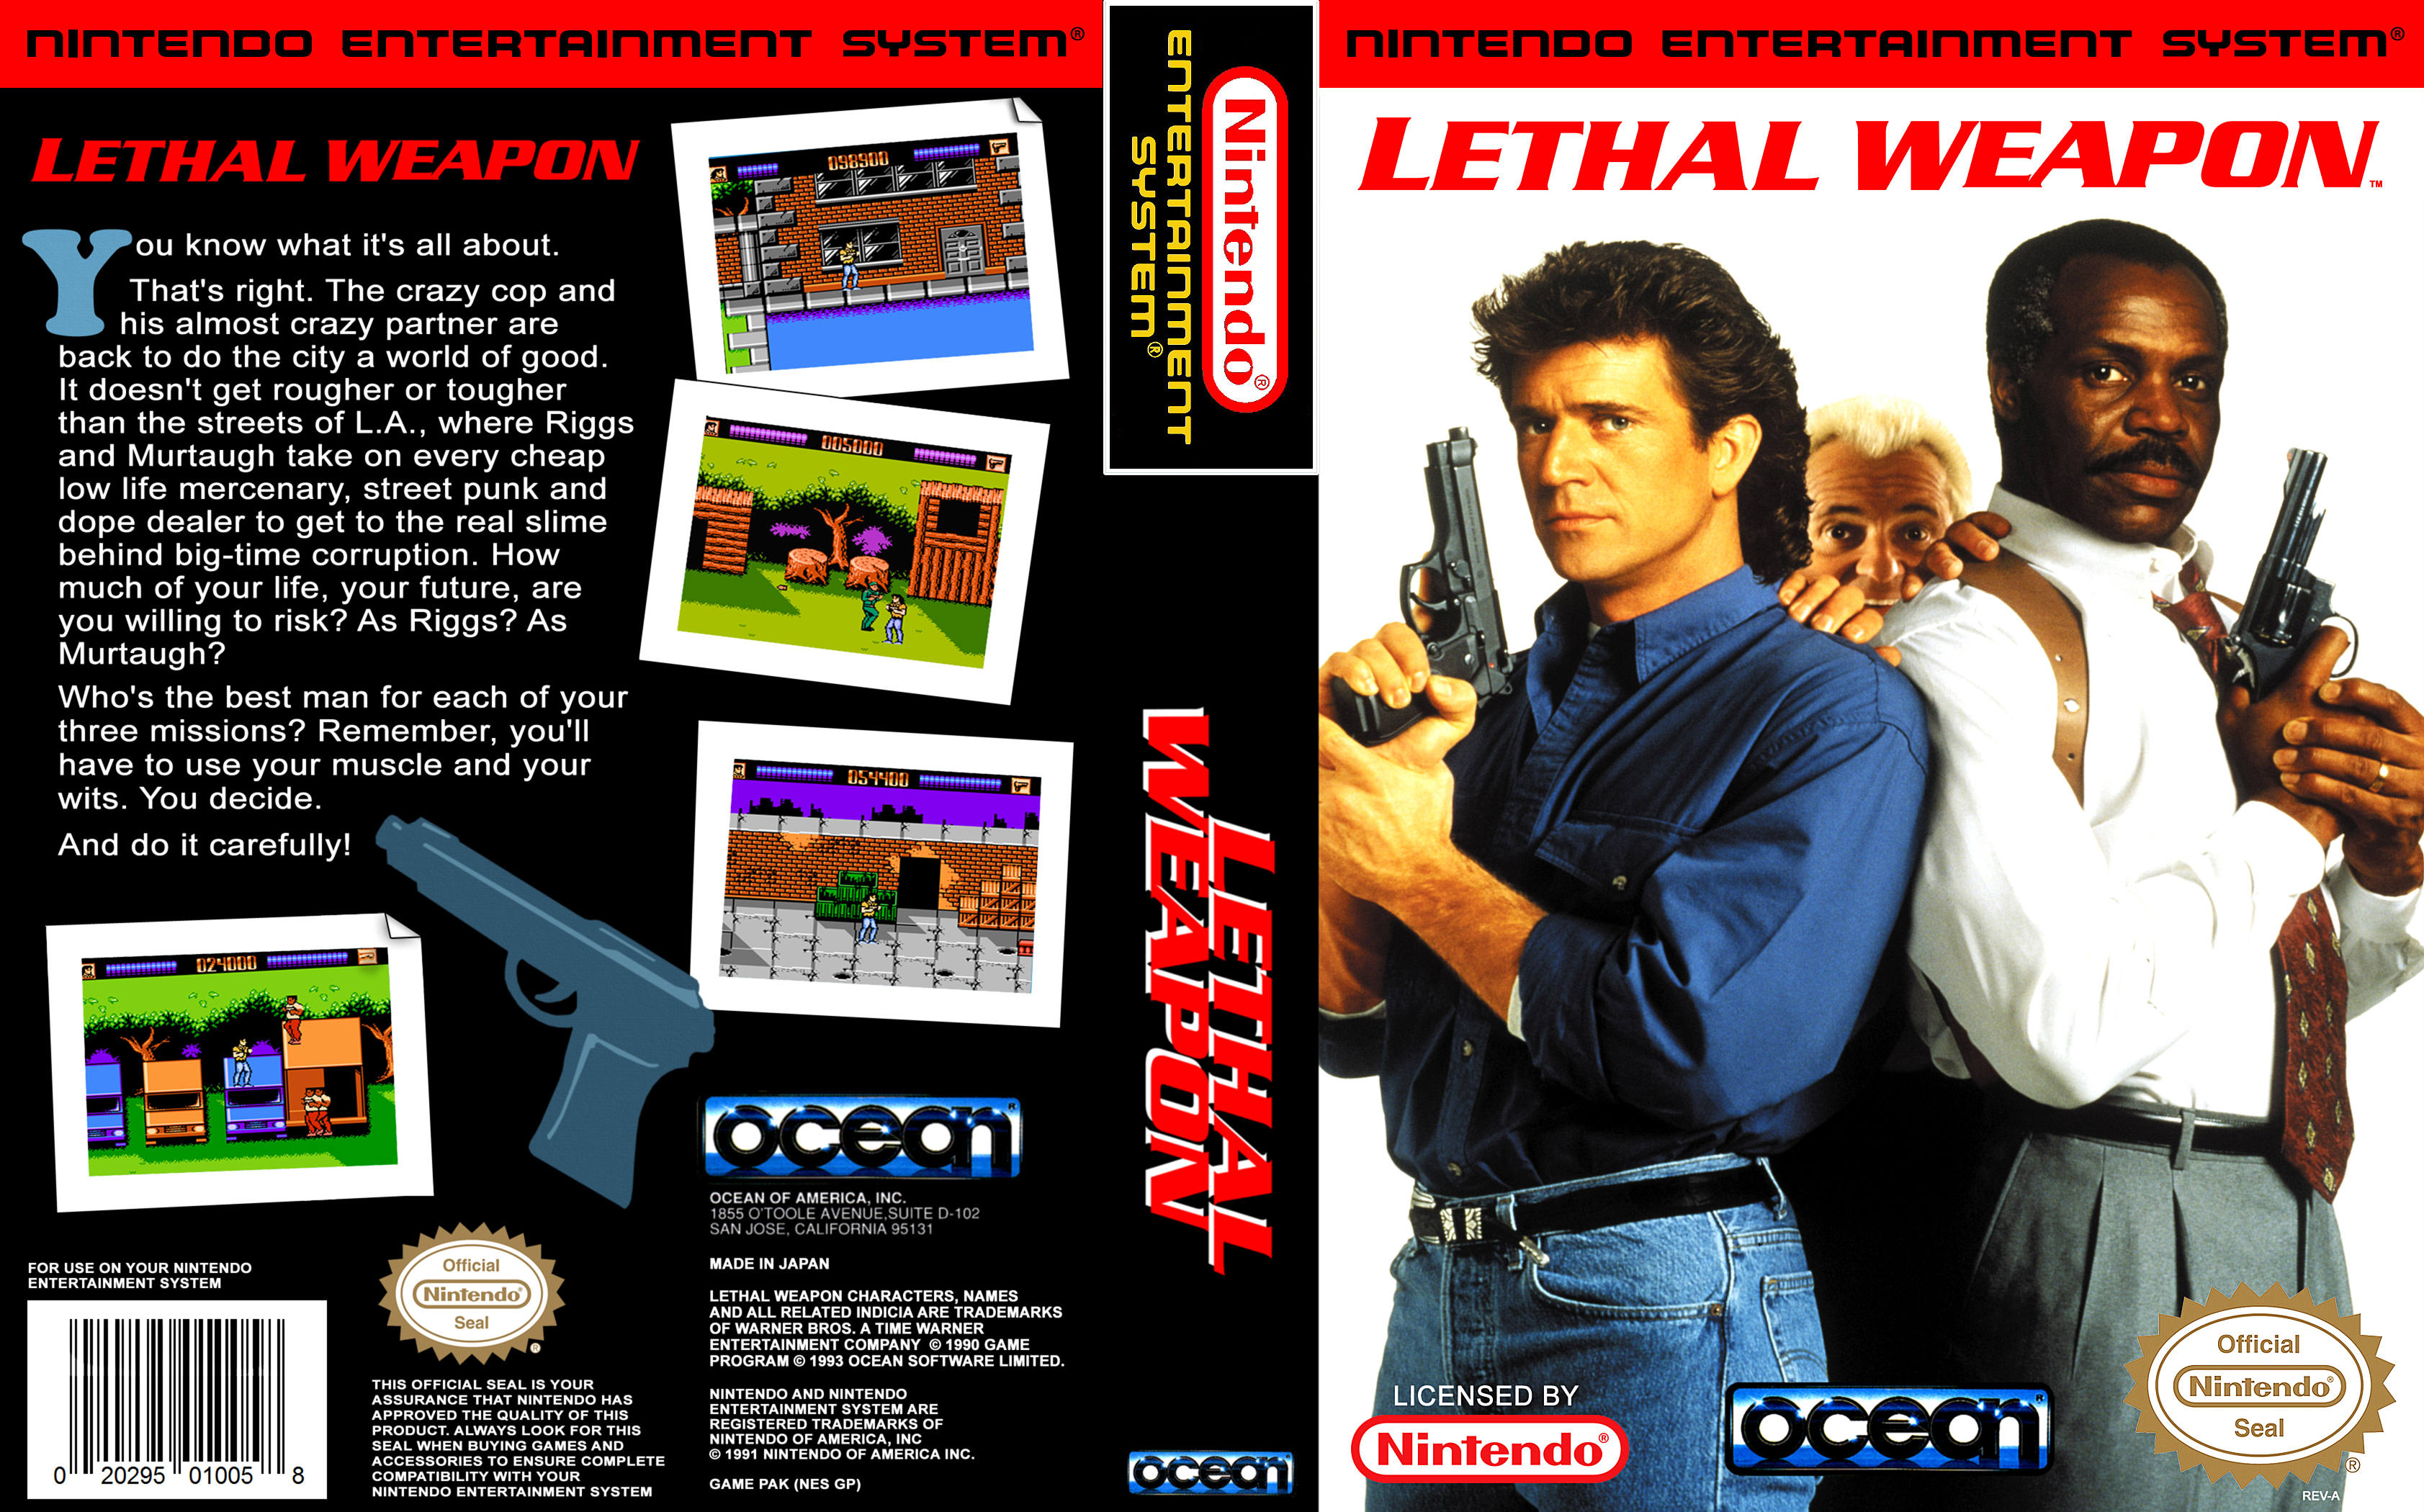 Lethal Weapon Денди. Lethal Weapon NES обложка. Dendy Lethal Weapon 2. Weapon игра Денди.. Lethal company c